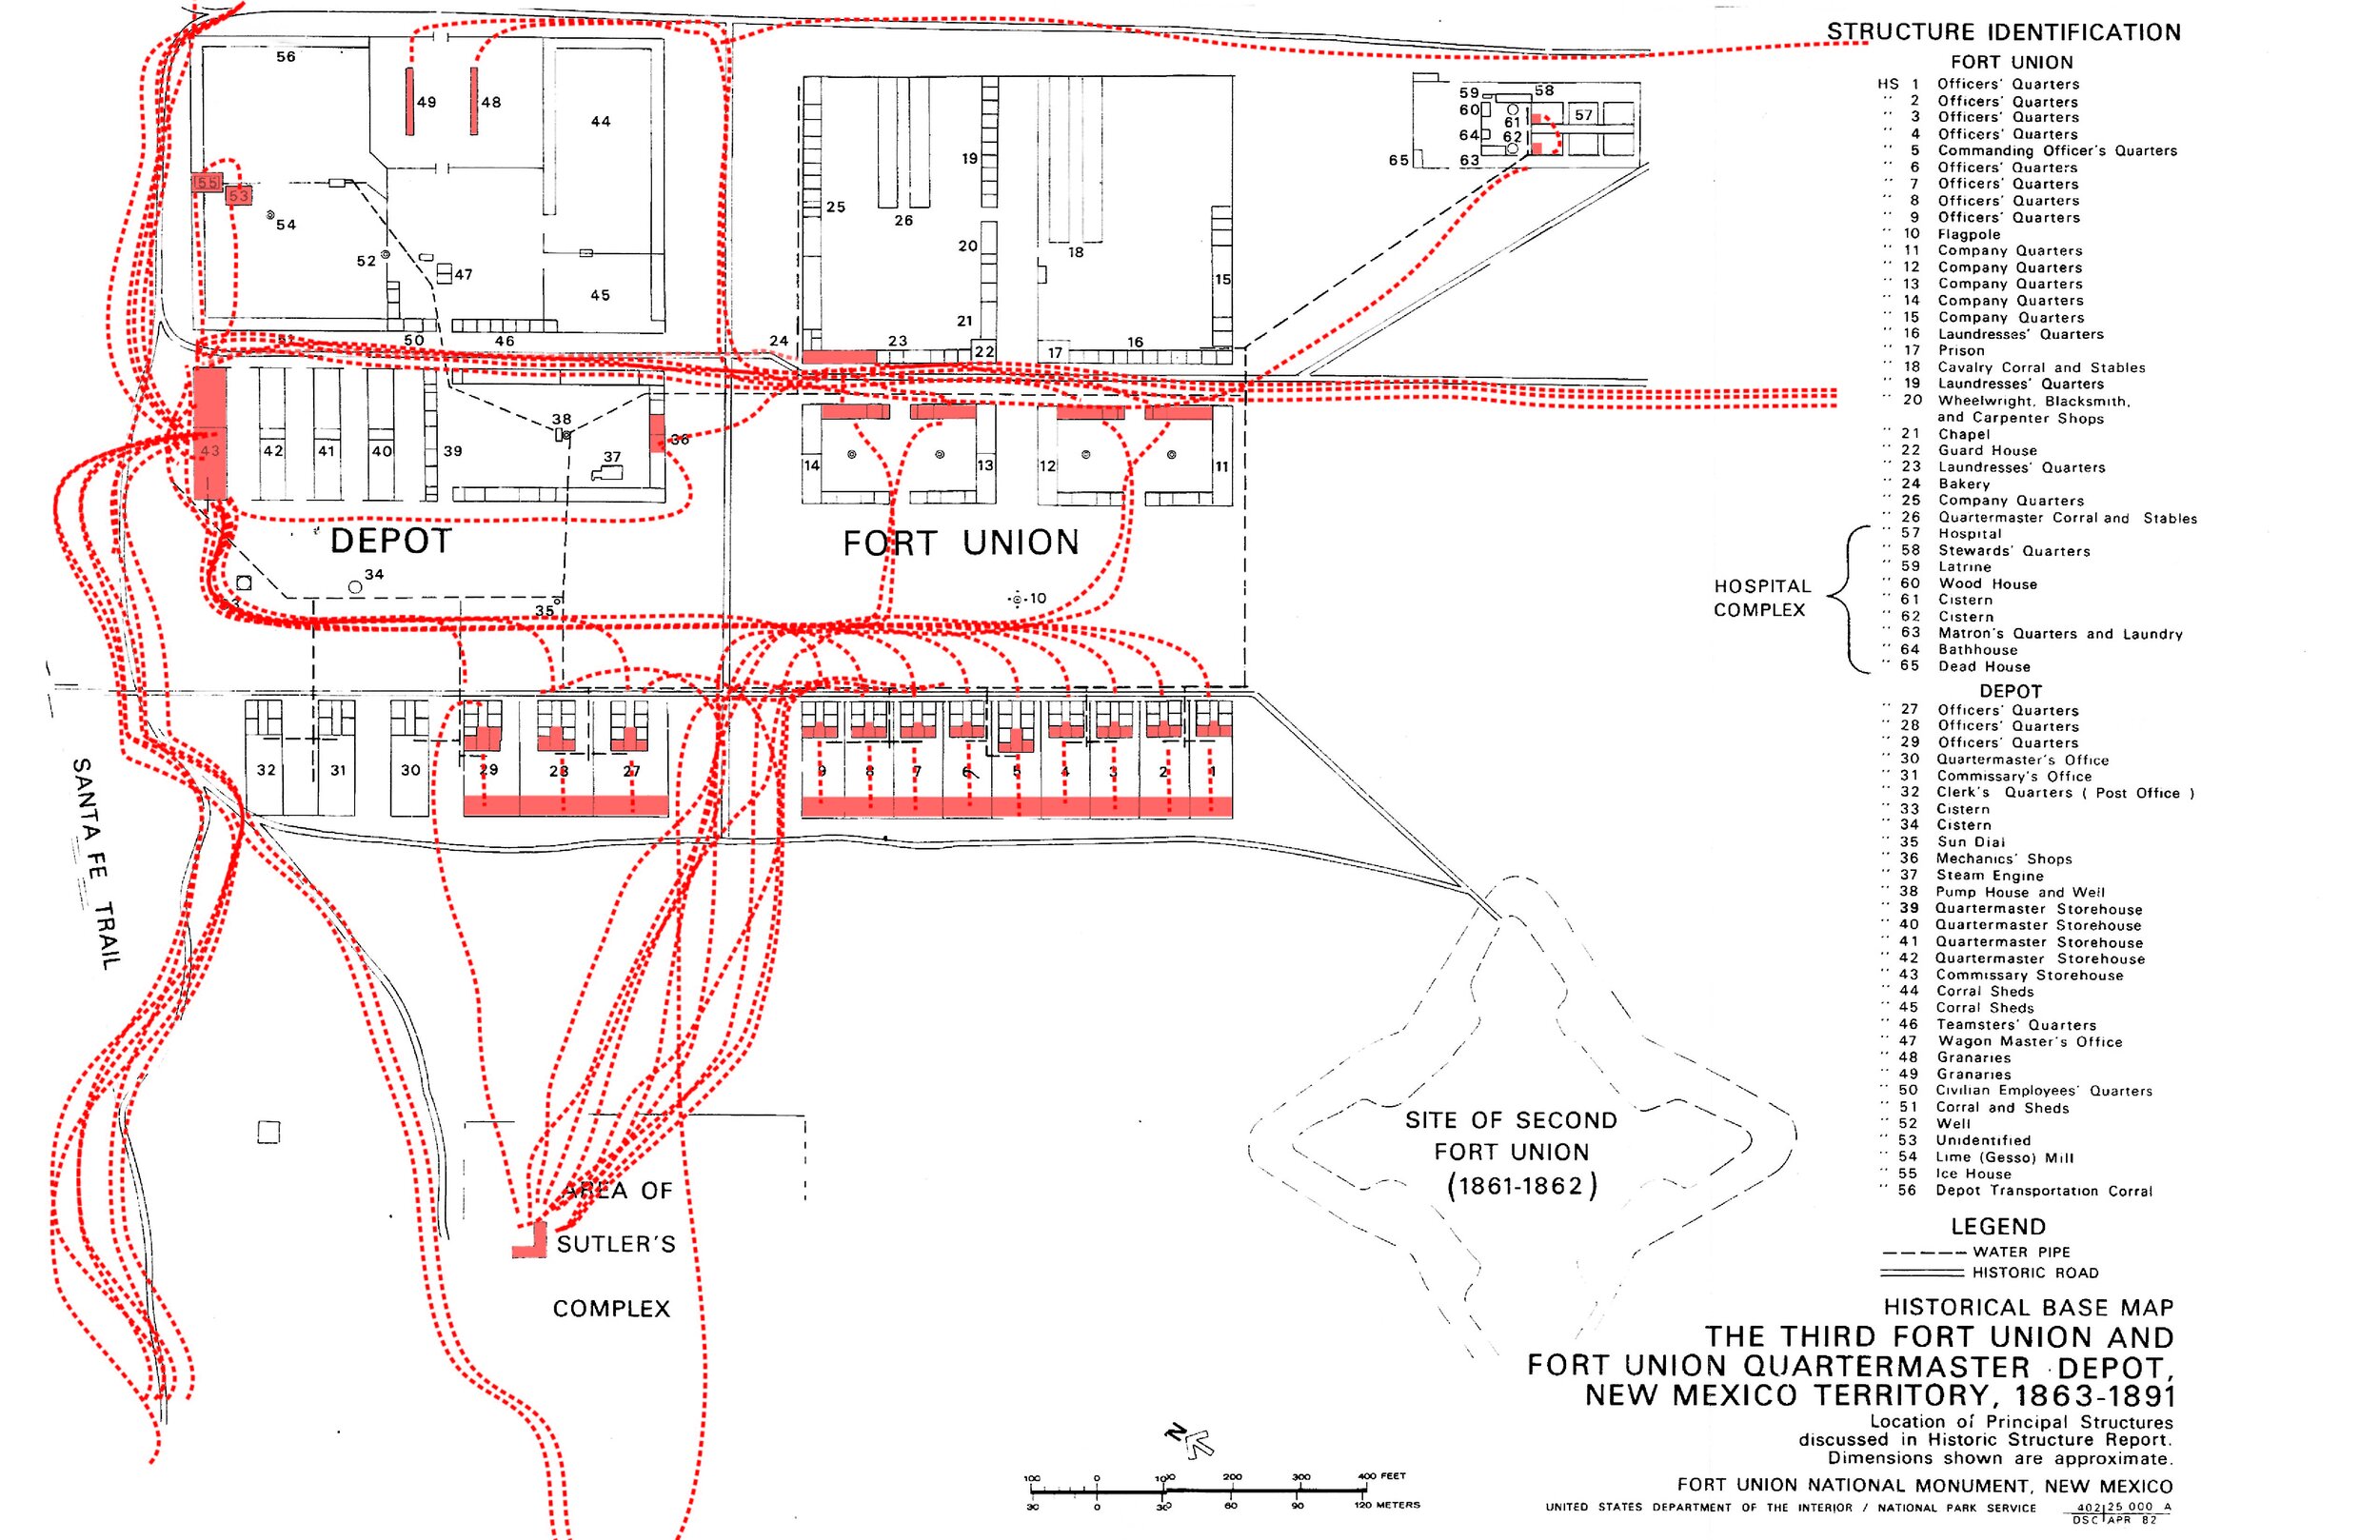  Figure 4. Map of foodways at Fort Union. Highlighted in red are all spaces where food was stored, consumed, or produced at Fort Union. The lines connecting them are surmised connections between food spaces. (Map annotated by author, adapted from a b